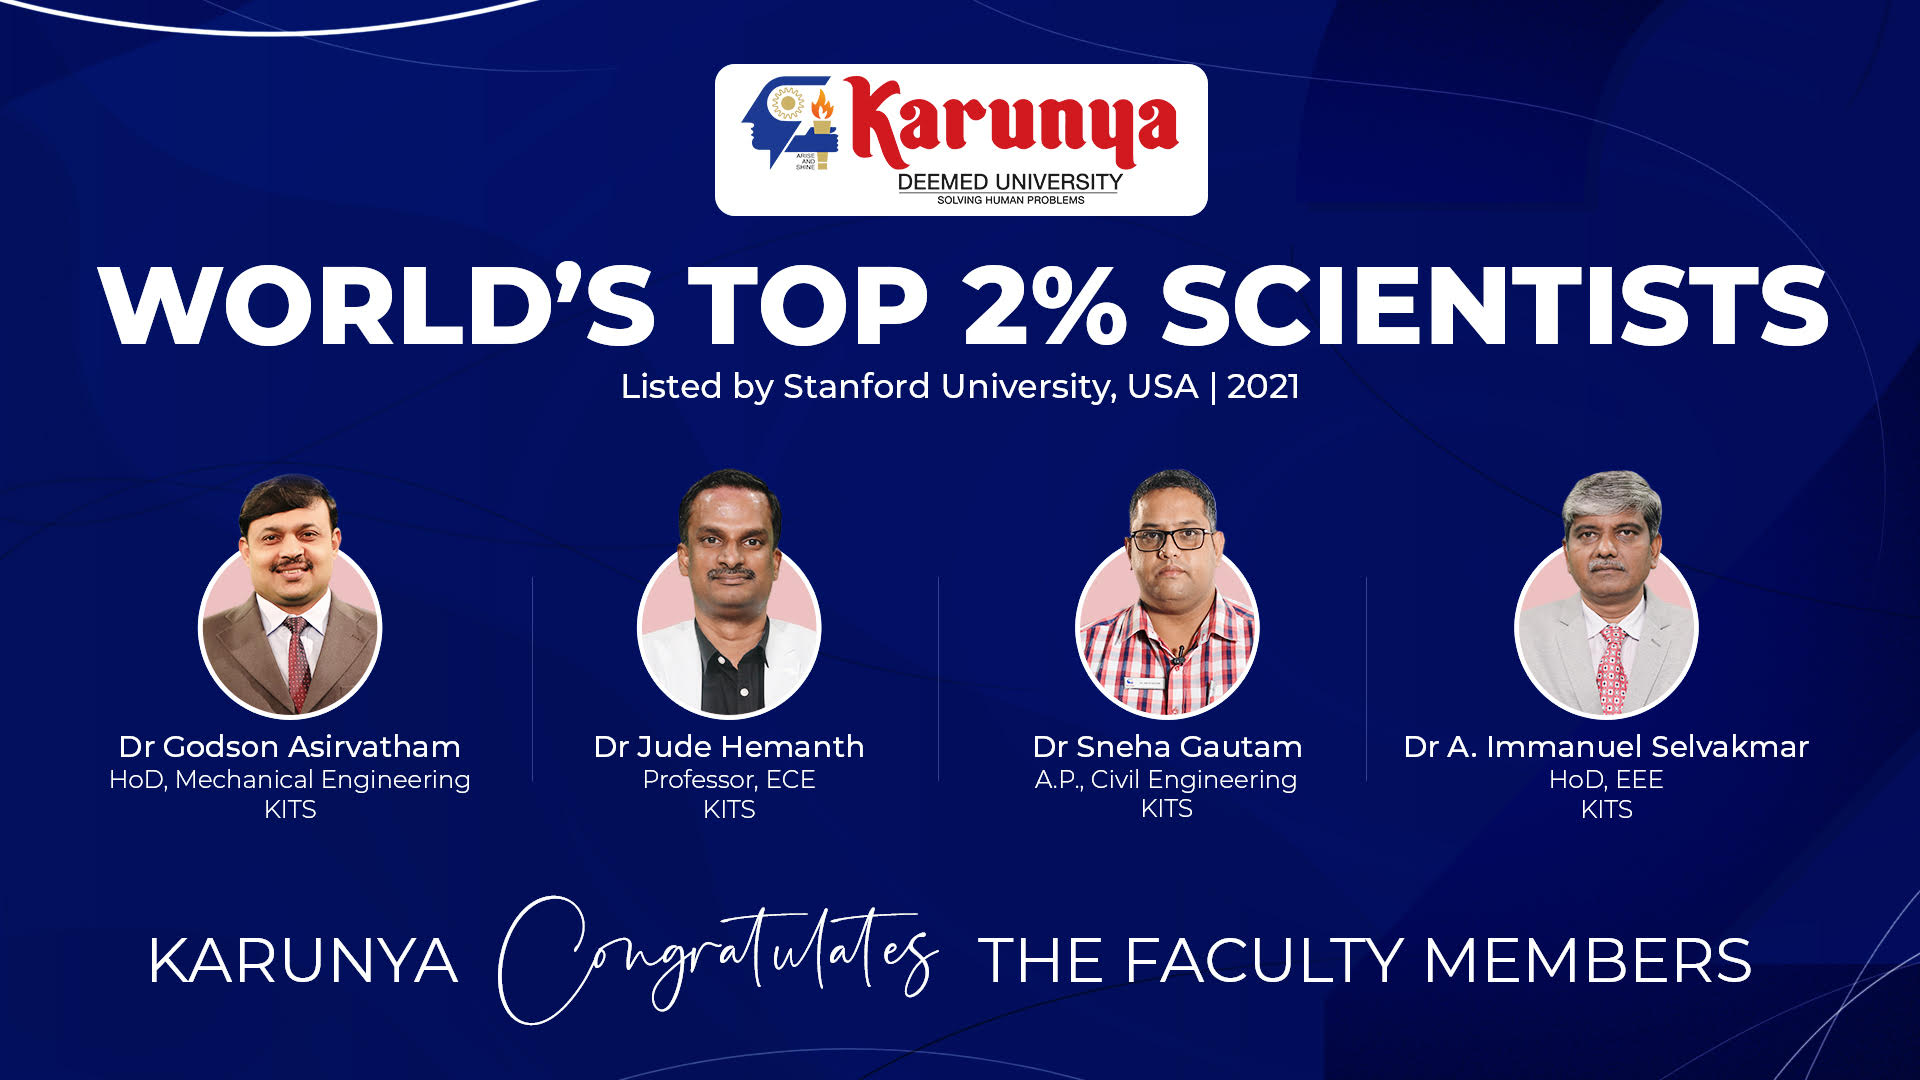 Four Karunya Deemed University Professors Listed in World's Top 2% Scientists: By Stanford University, 2021